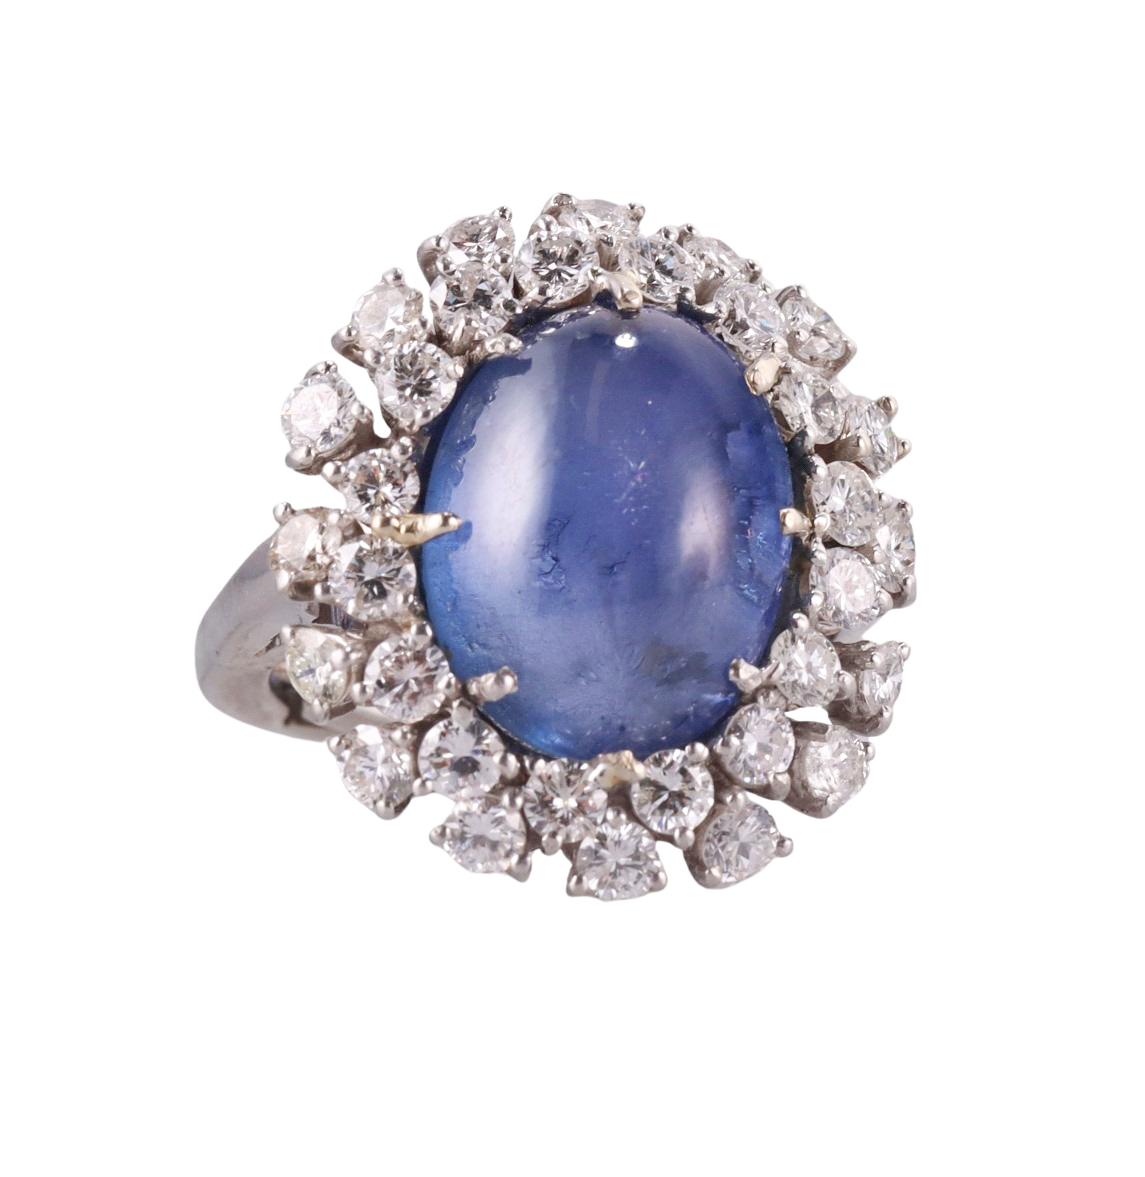 Impressive 18k gold ring with center oval cabochon sapphire - approx. 15.20ct (stone measures 14.8 x 11.6 x 8.2mm), surrounded with approx. 2.00ctw SI1/H diamonds. Ring size 5, top is 24mm x 21mm. Tested 18k, not marked. Weight 15.8 grams.